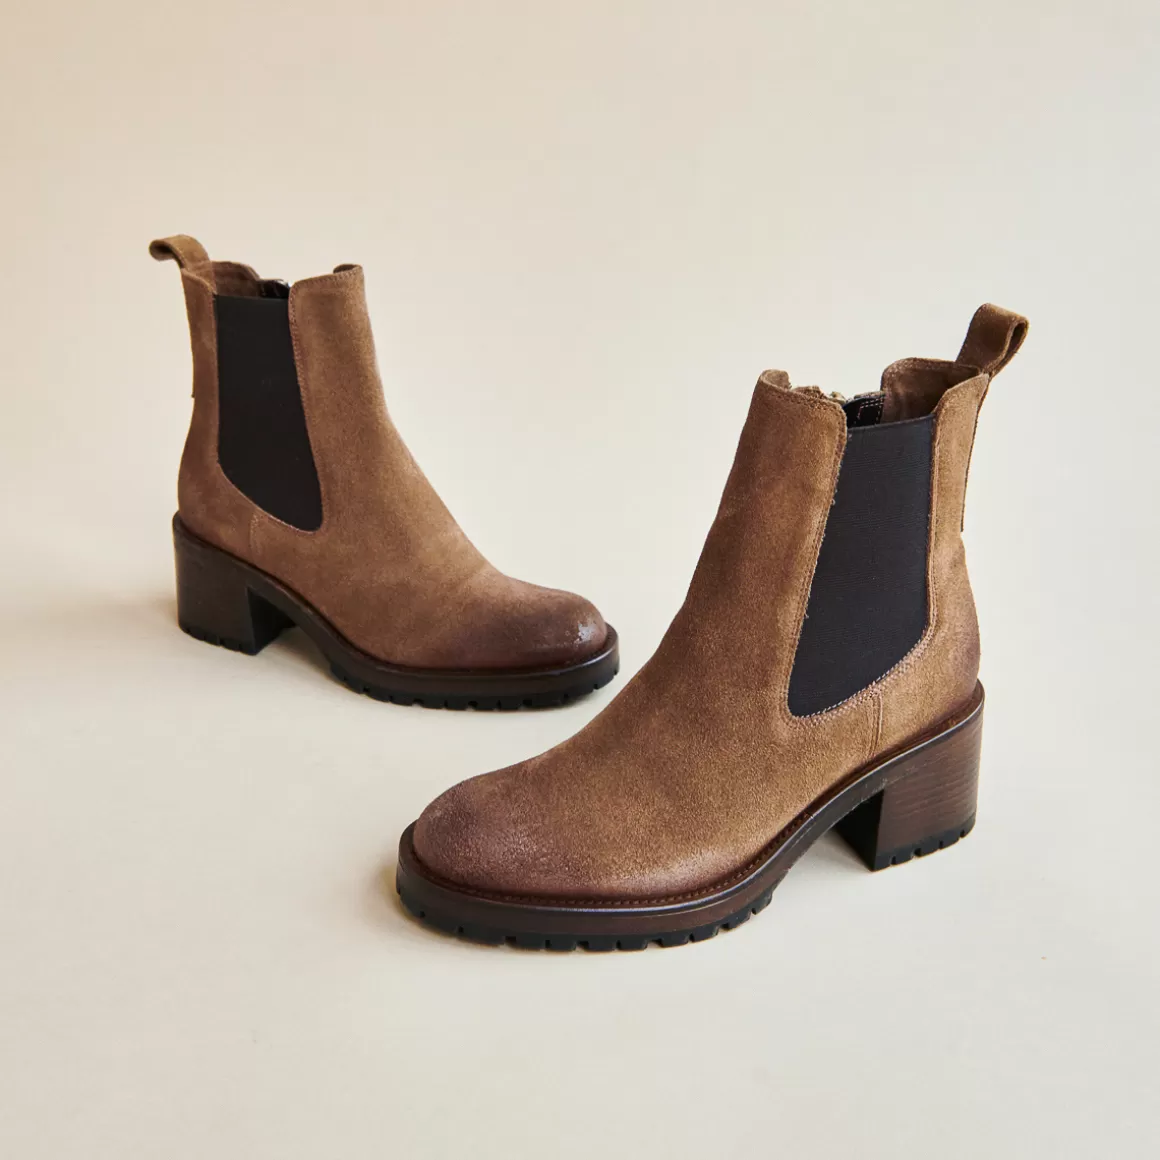 High boots with notched soles<Jonak Discount